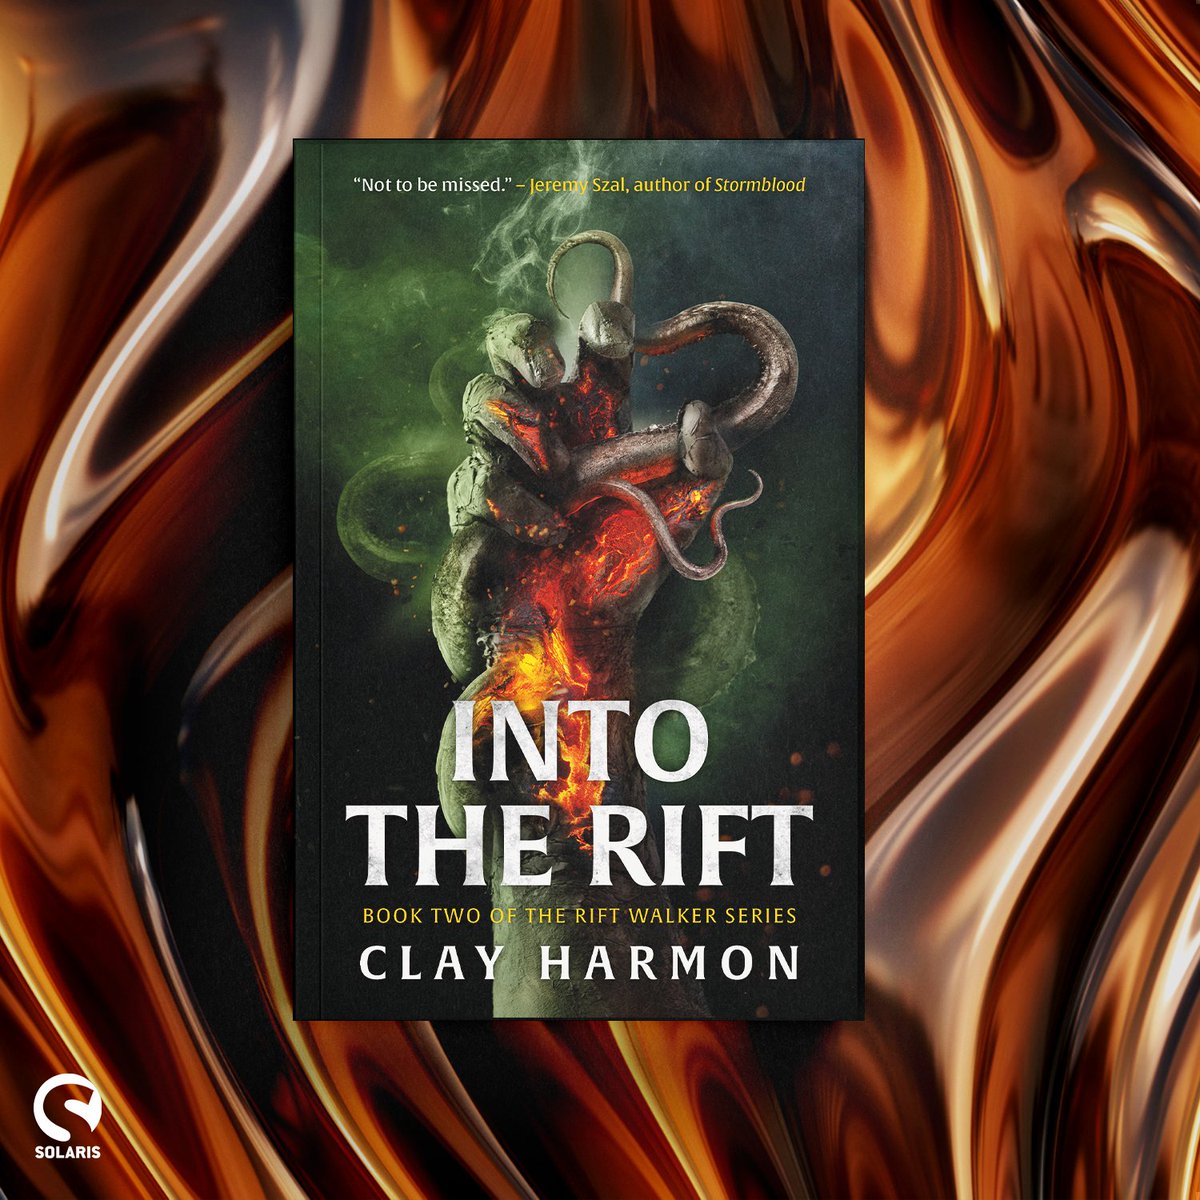 ICYMI our friends over @Grimdark_Mag revealed the cover for INTO THE RIFT, the much anticipated sequel to @ClayHarmonII's FLAMES OF MIRA! Fabulous cover art by @LarryRostant! See the full reveal and Clay's thoughts bit.ly/49K9JBT Preorder book 2 geni.us/IntoTheRift